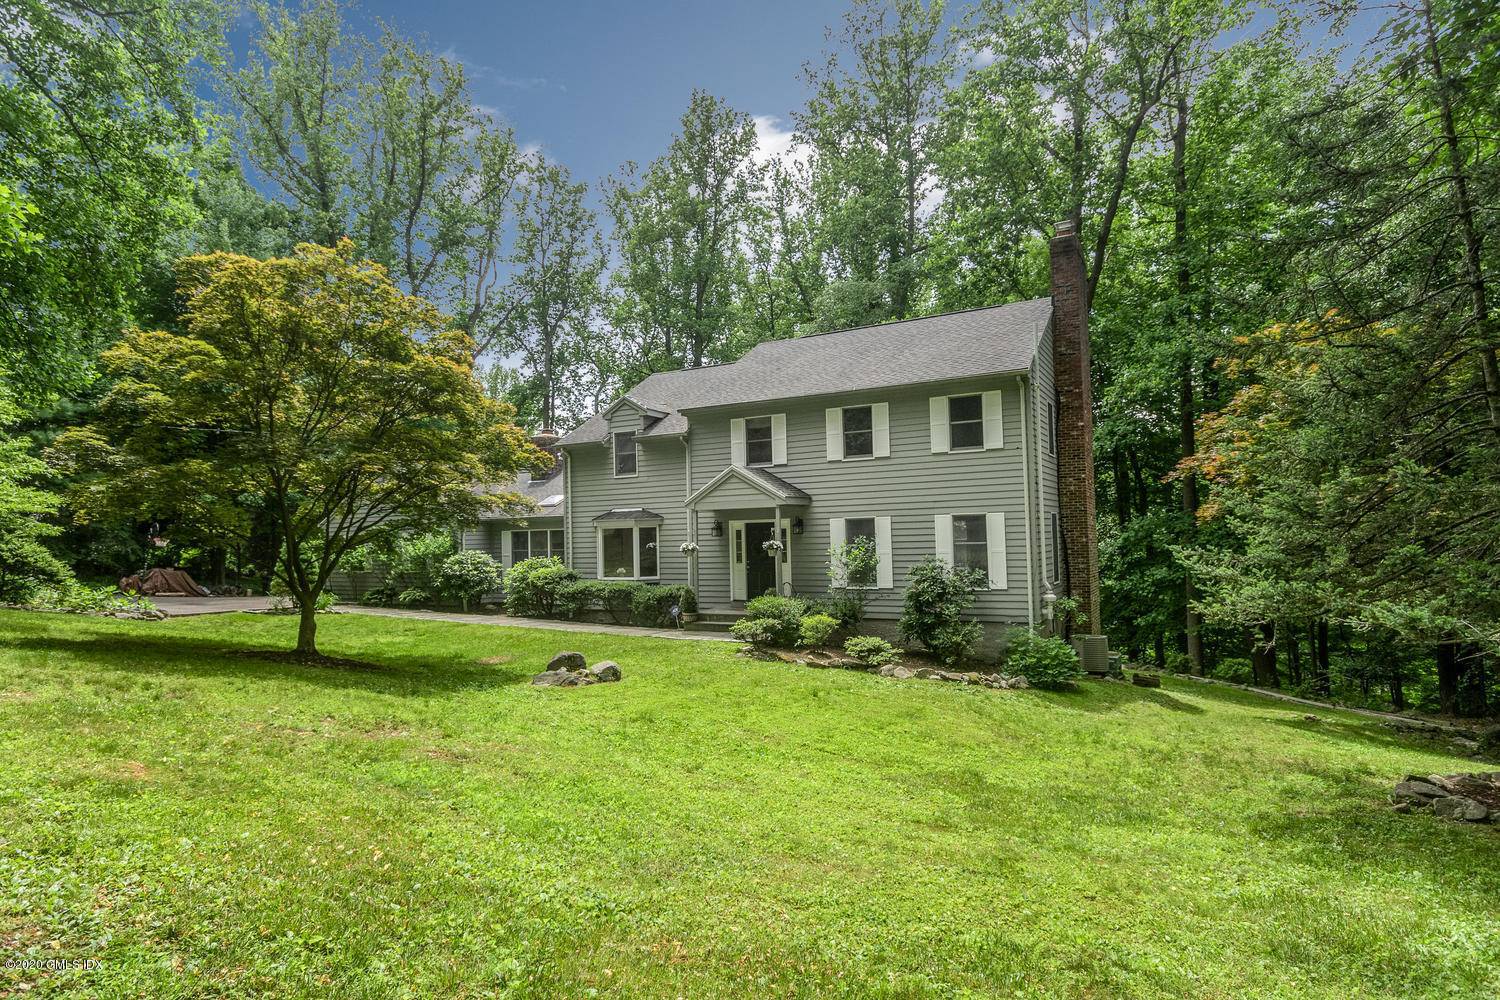 Move right in. Exceptional turn key North Stamford colonial in serene private setting on over 2 acres.